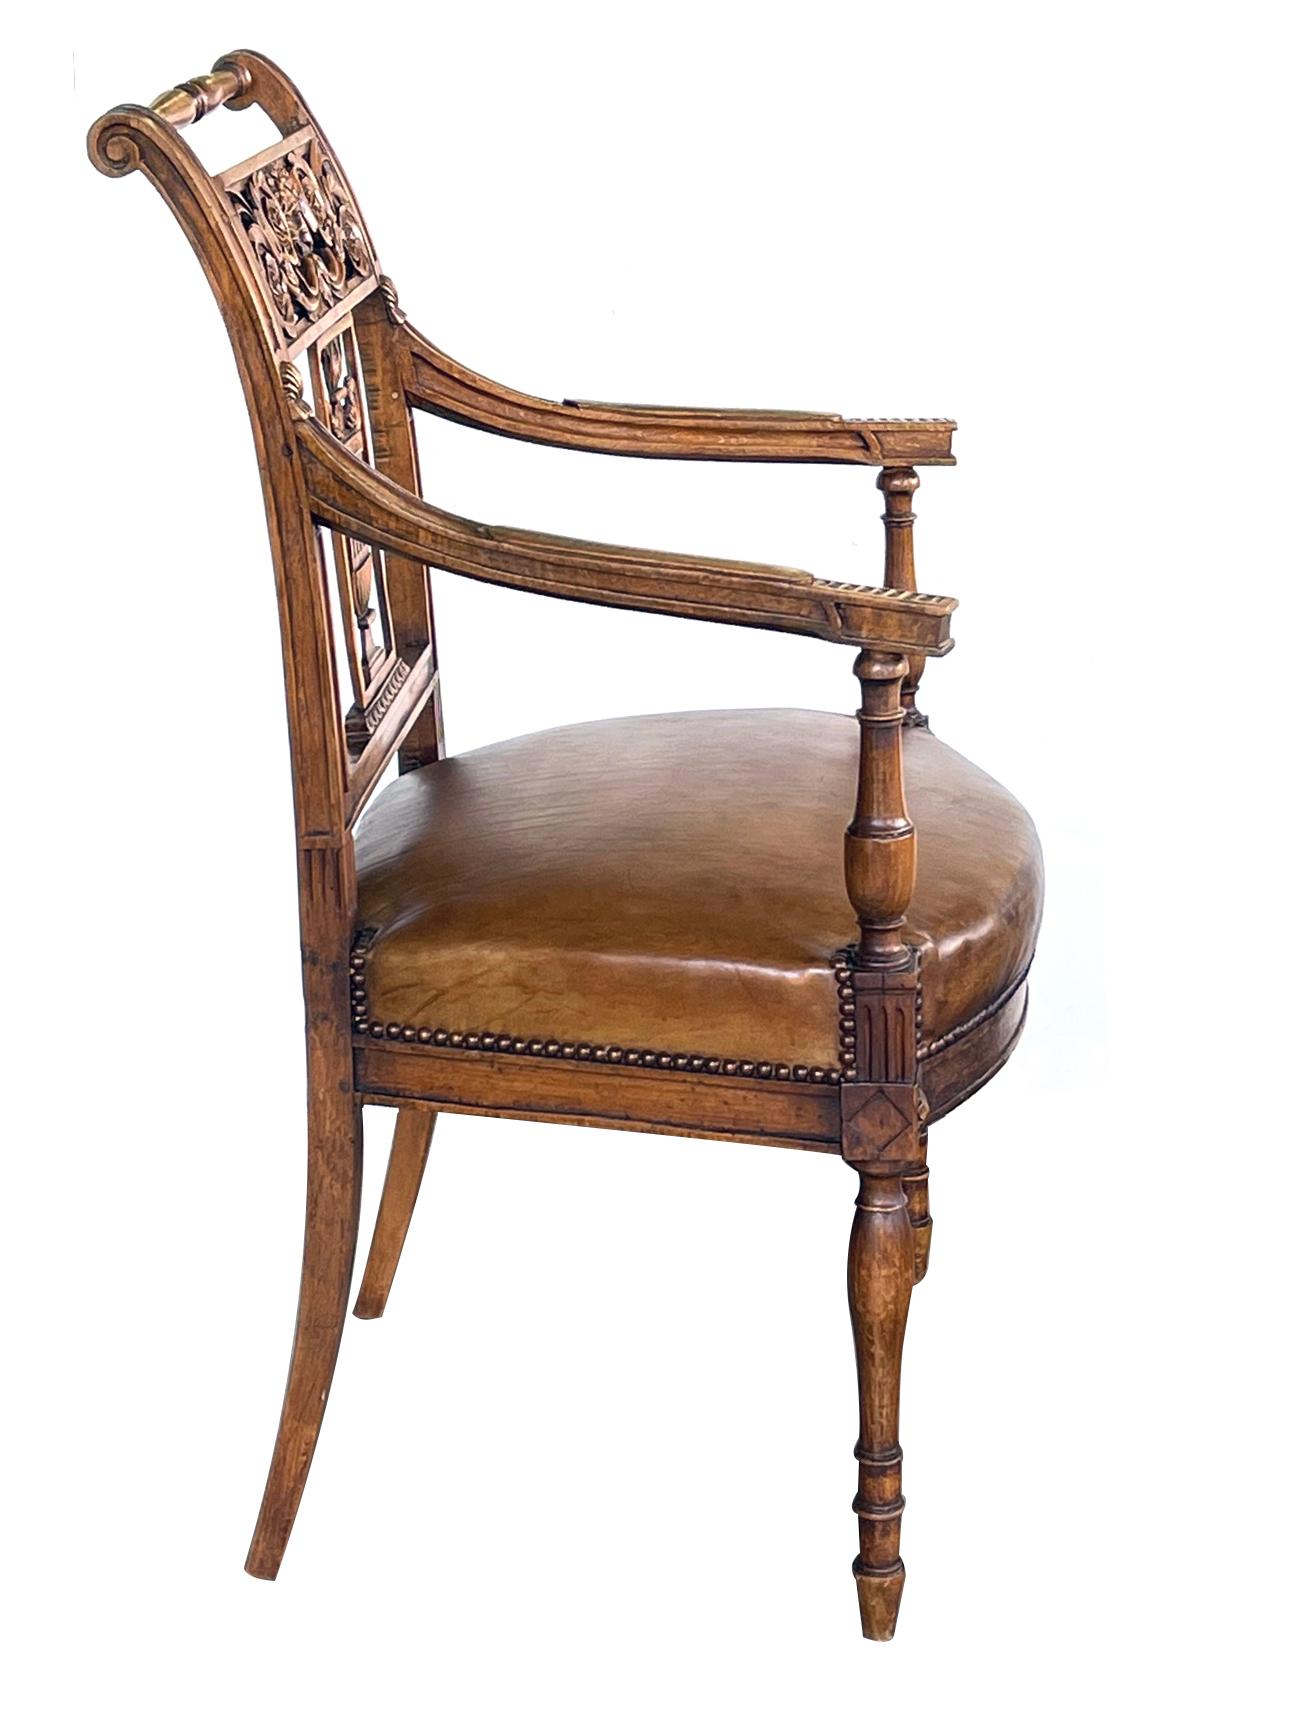 Italian Neoclassical Carved Fruitwood Armchair with Leather Seat For Sale 3